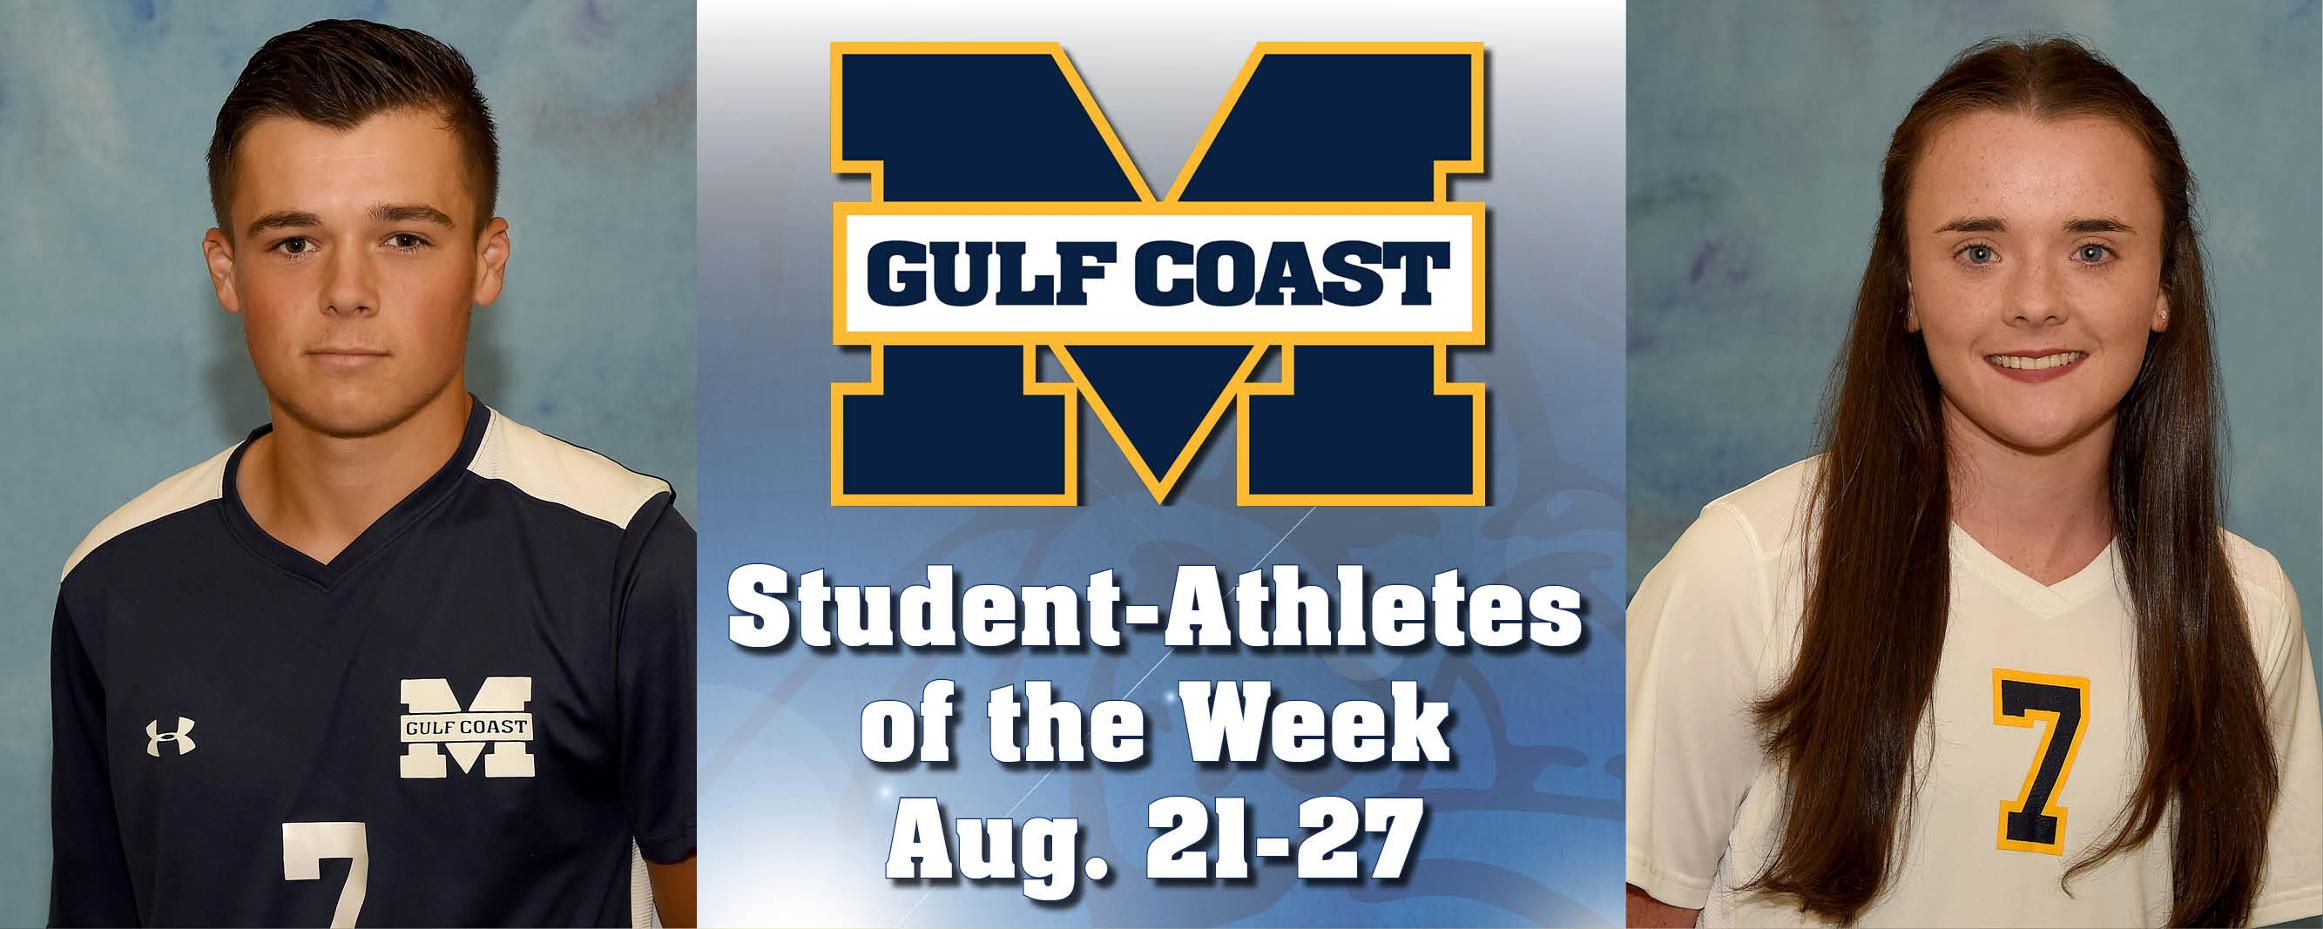 Hall, Longsden named Student-Athletes of the Week